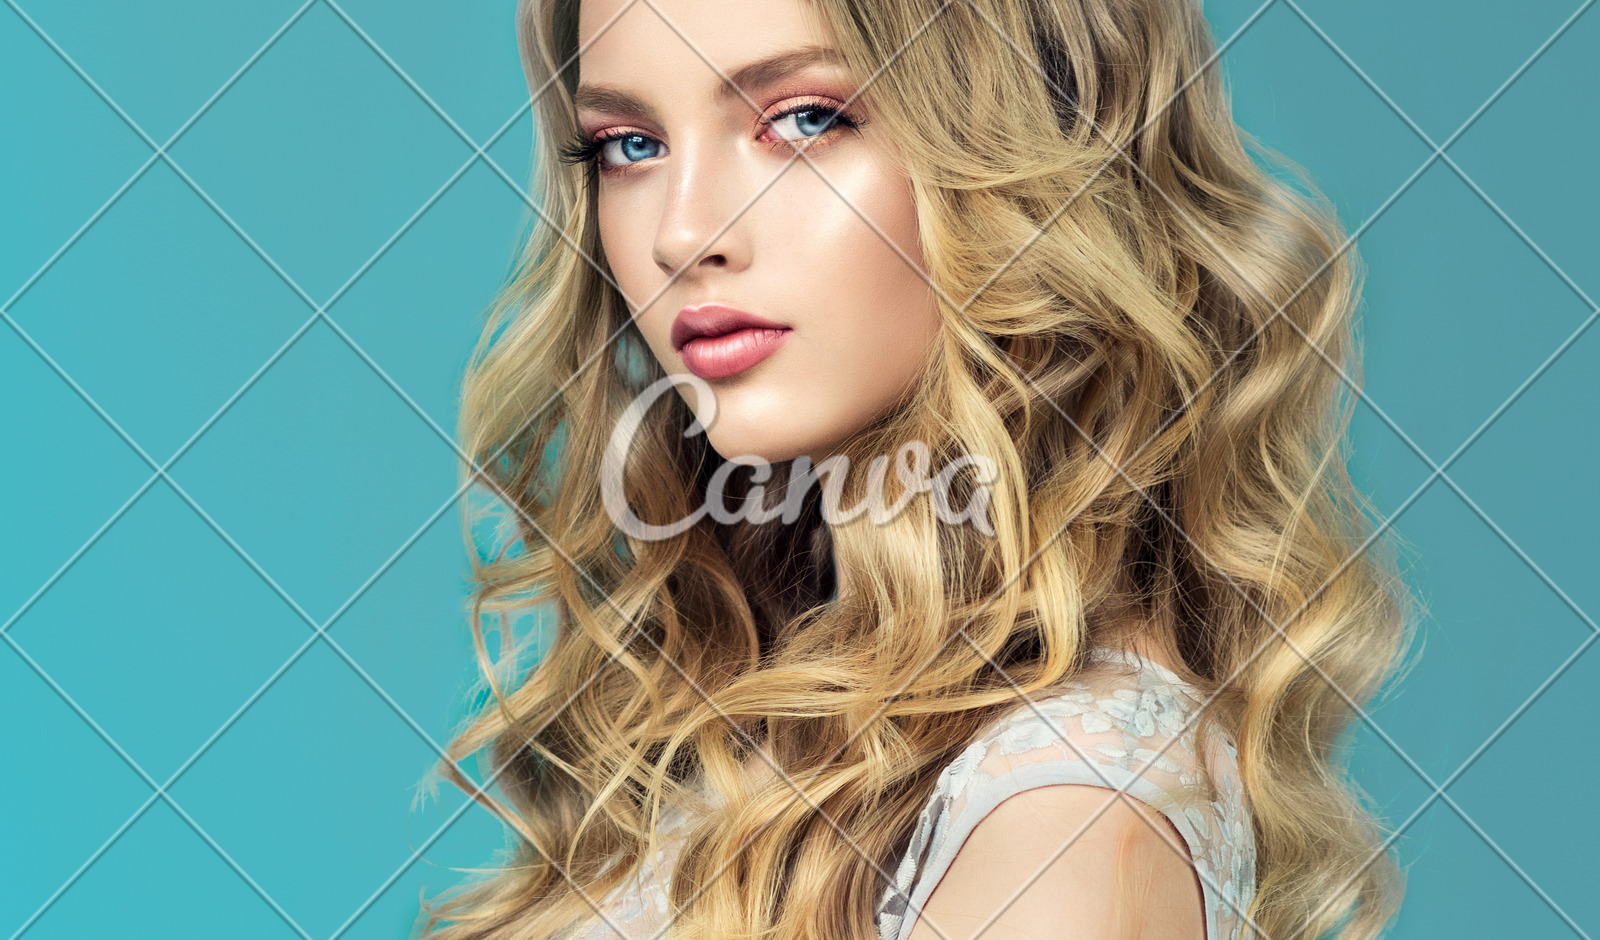 Young Blonde Haired Beautiful Model With Long Wavy Well